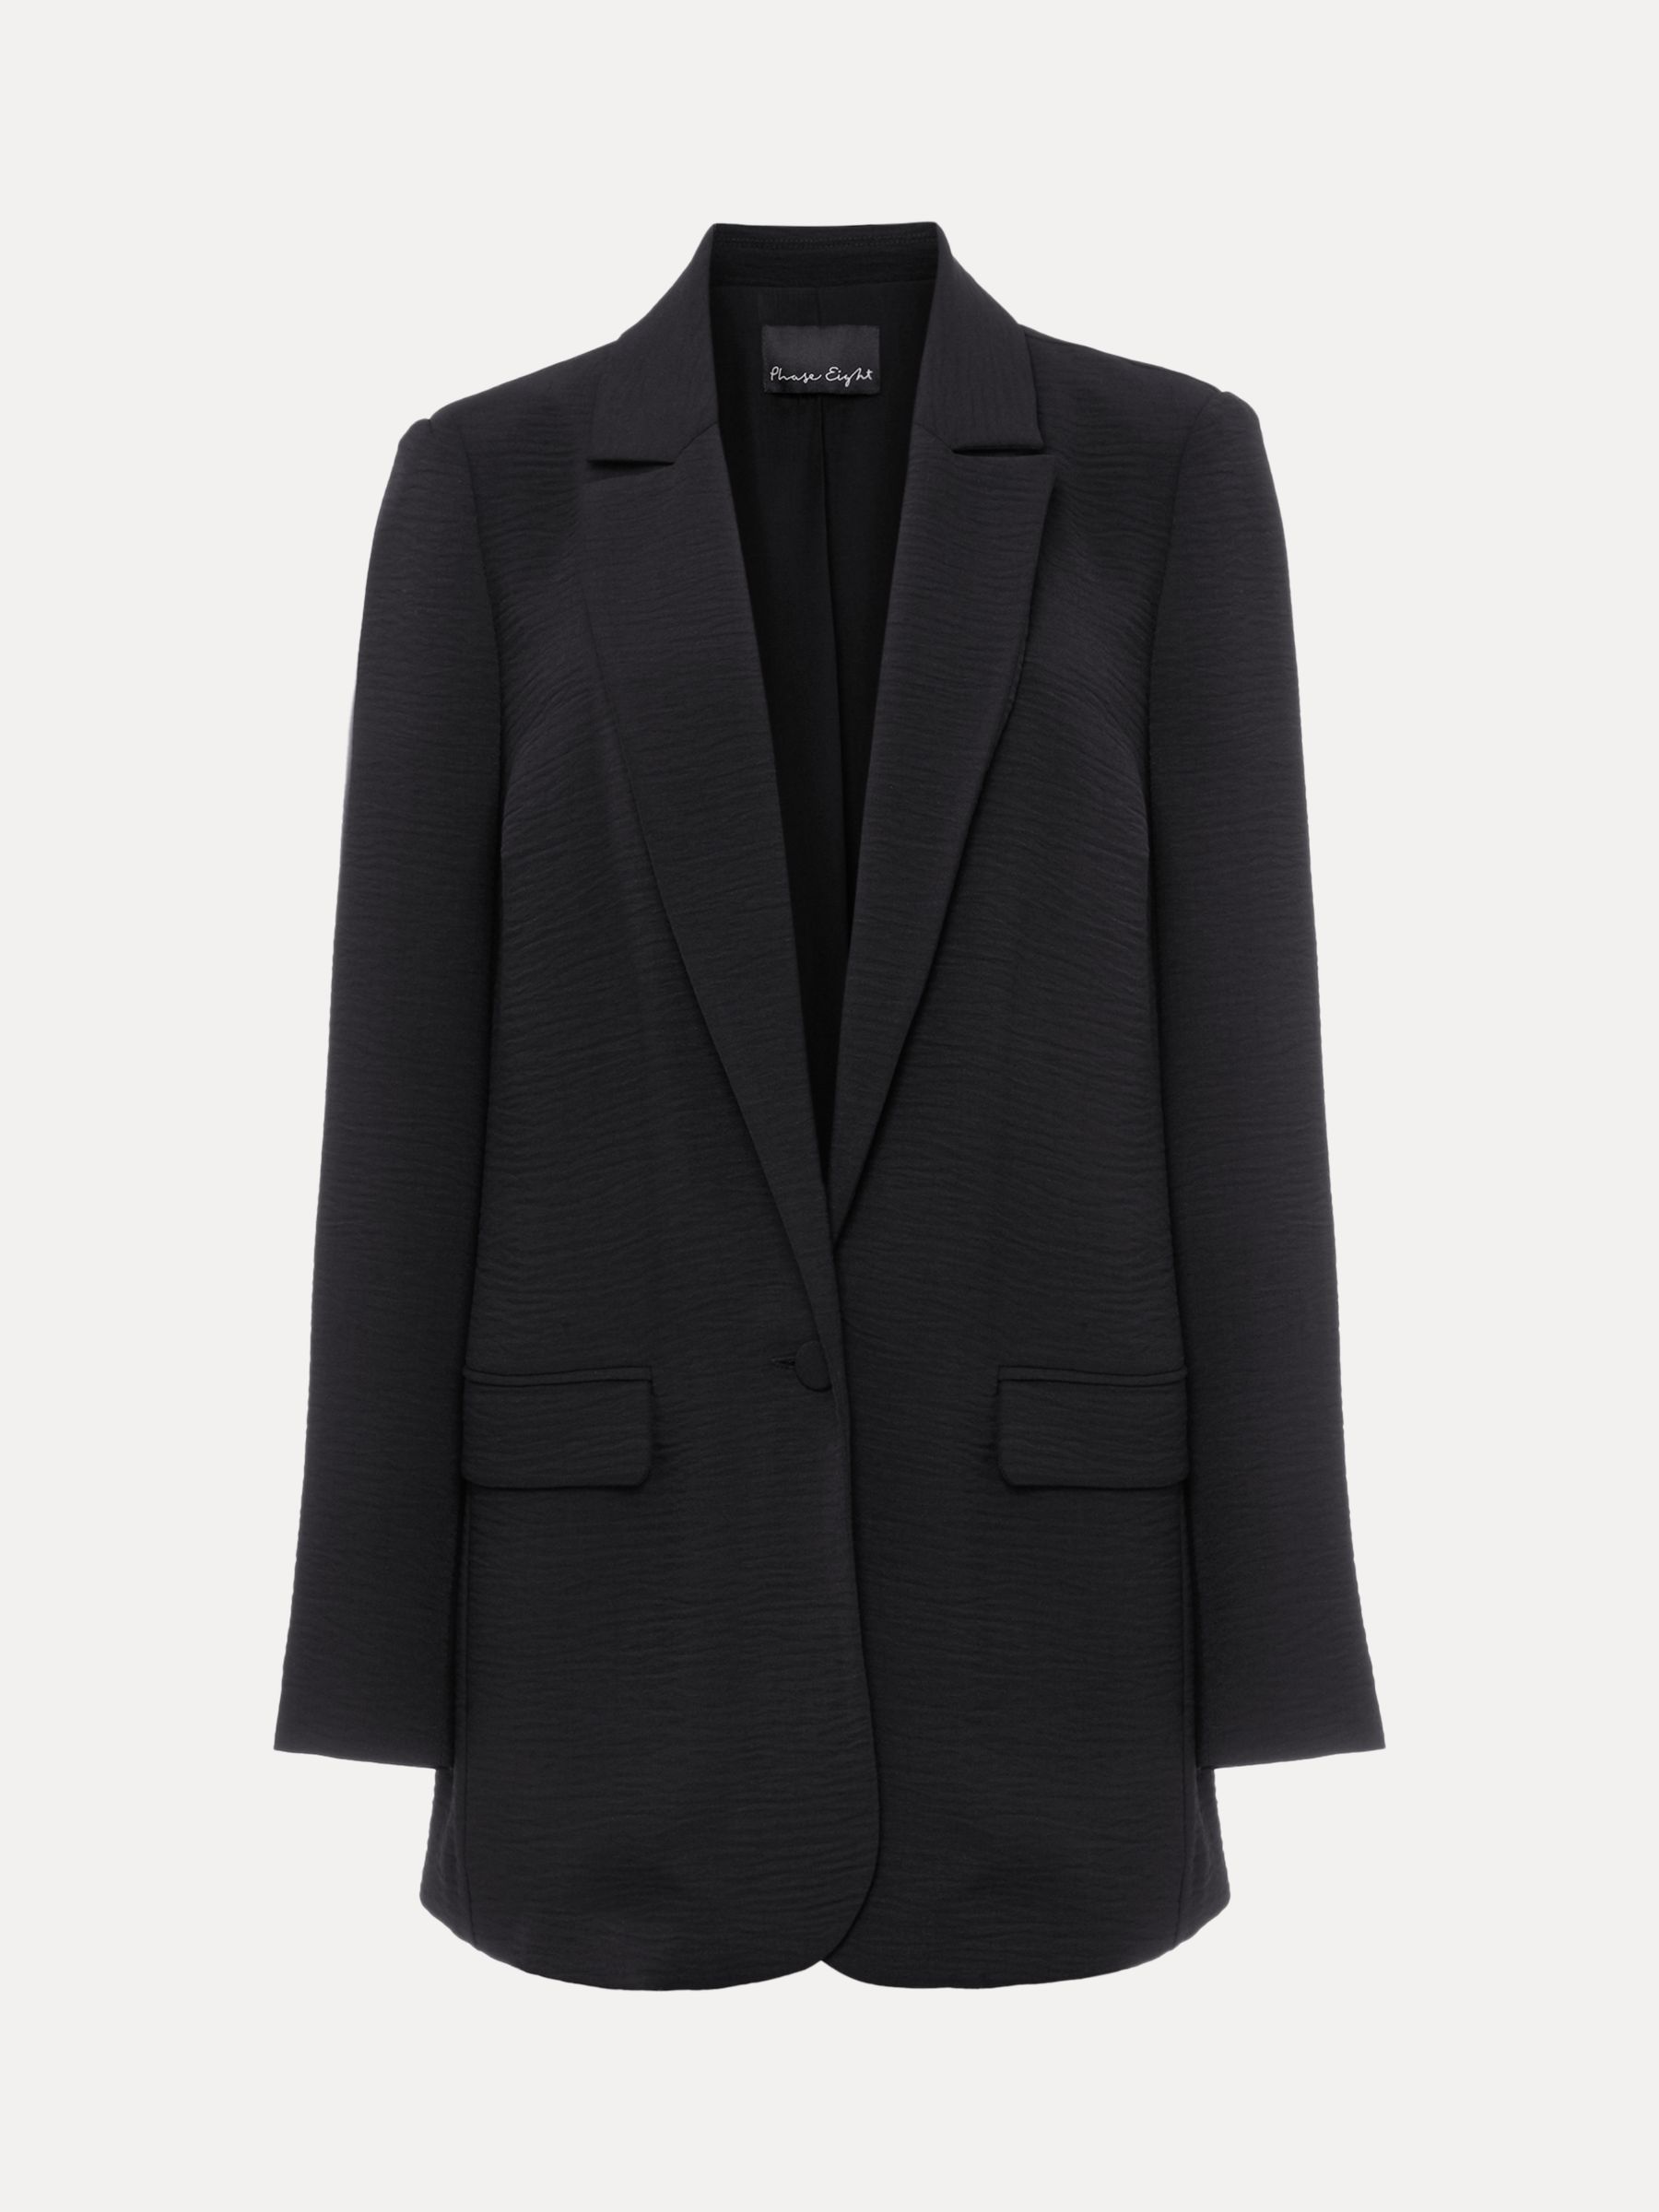 Buy Phase Eight Opal Suit Jacket Online at johnlewis.com